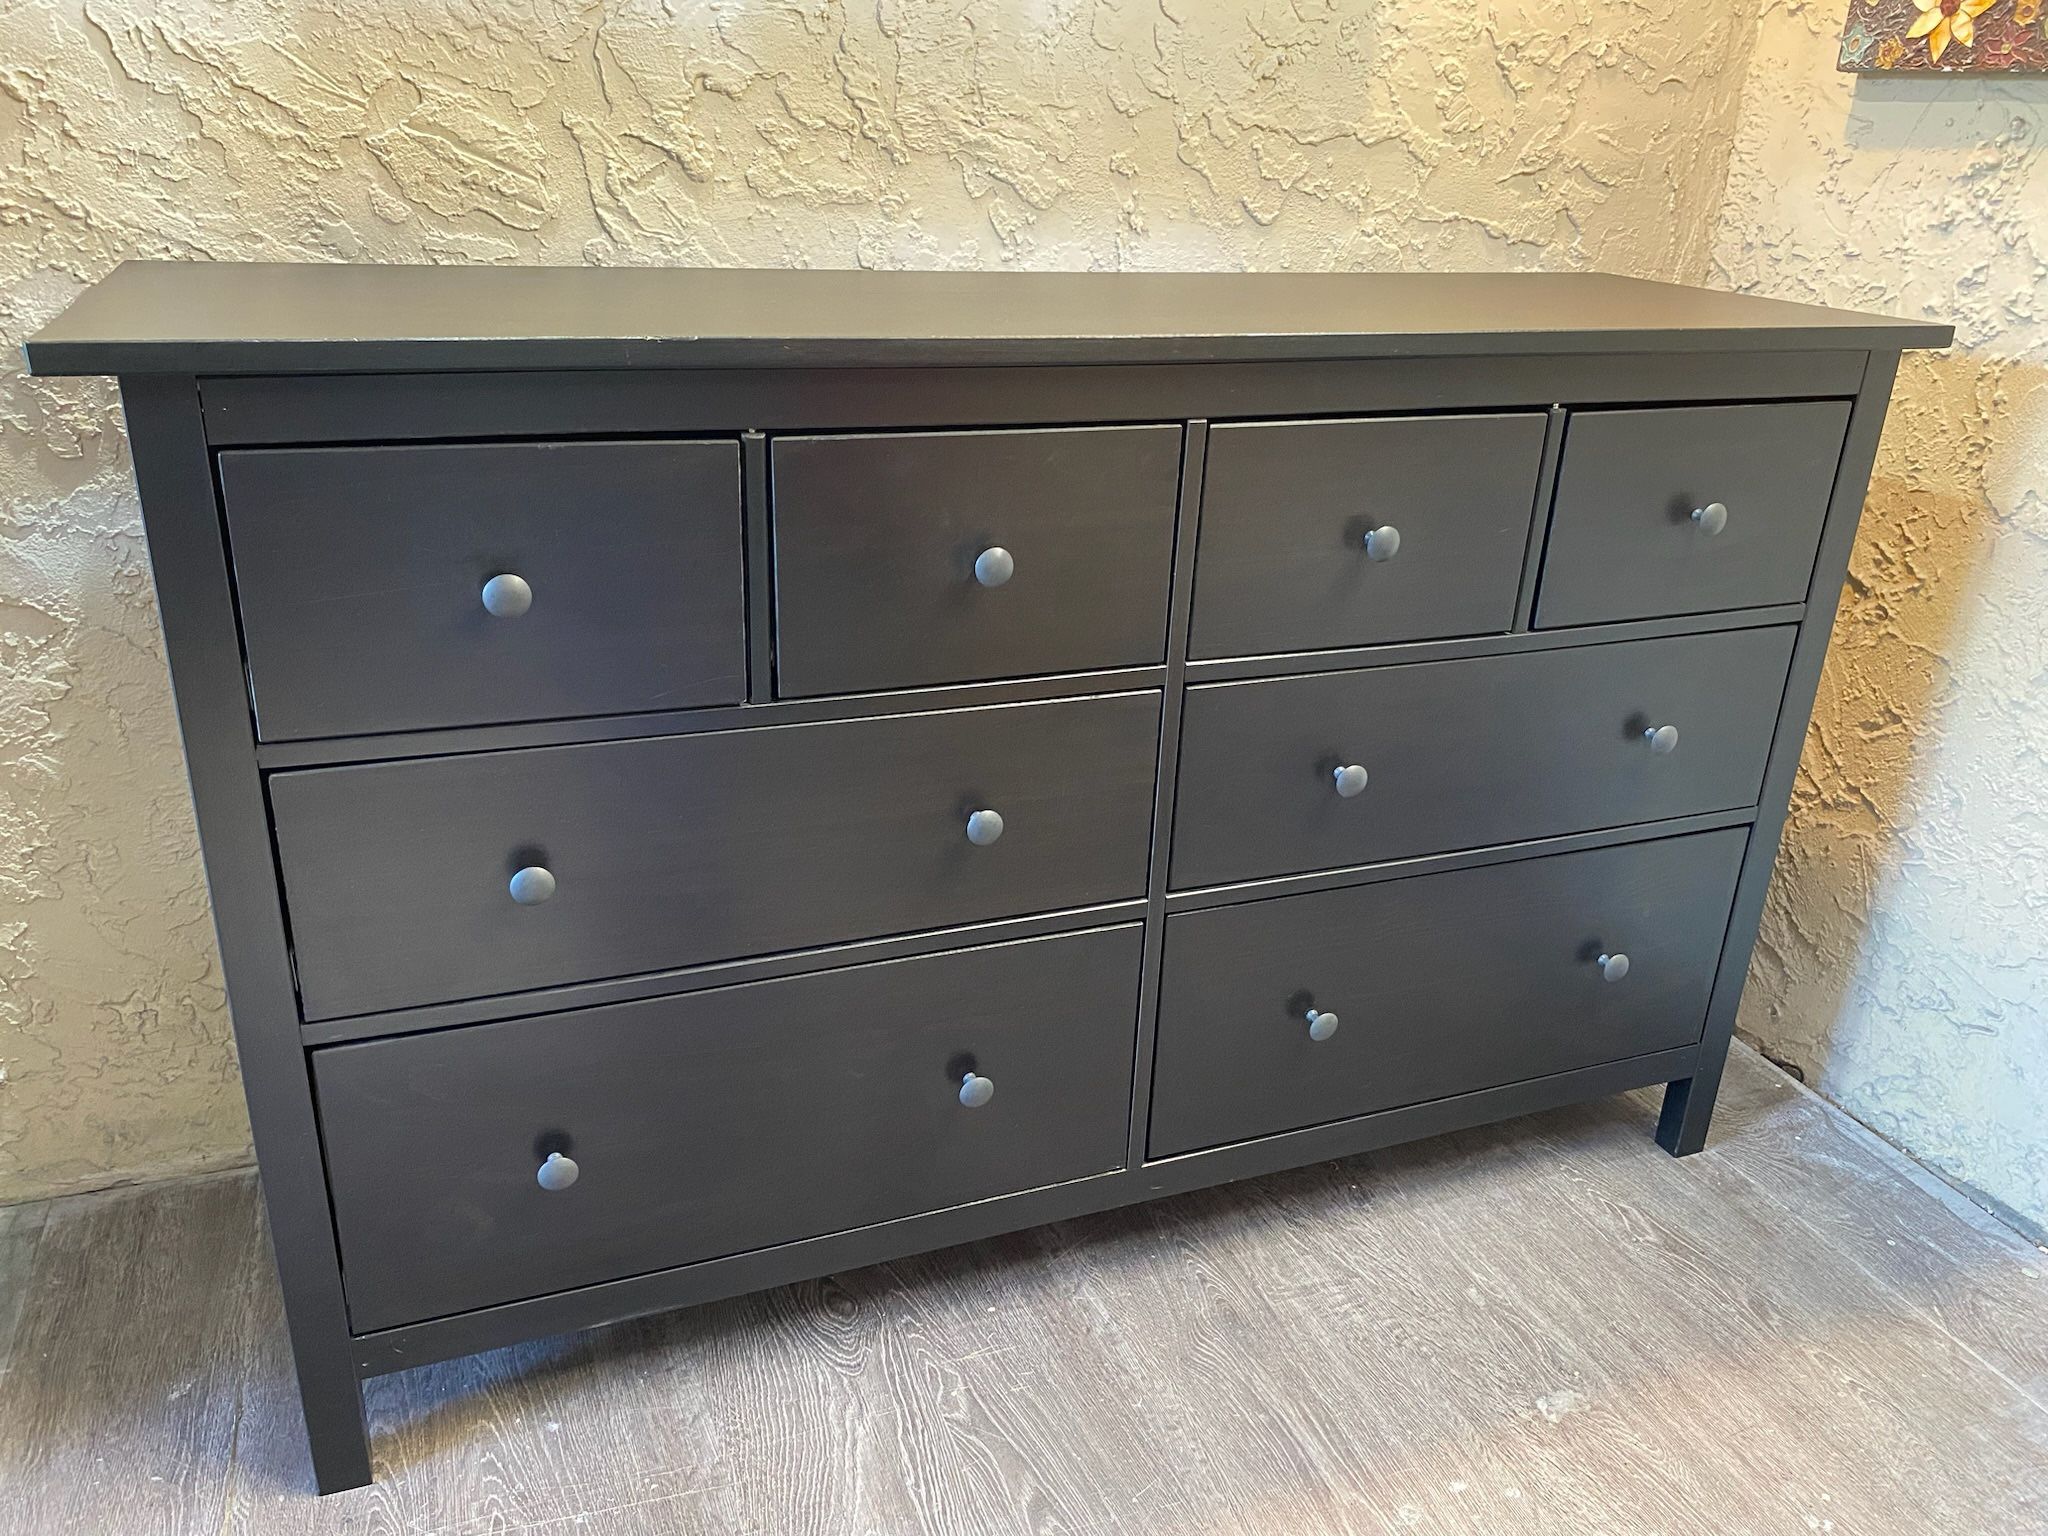 IKEA HEMNES SOLID WOOD DRESSER - Delivery For A Fee - See My Other Items 😀